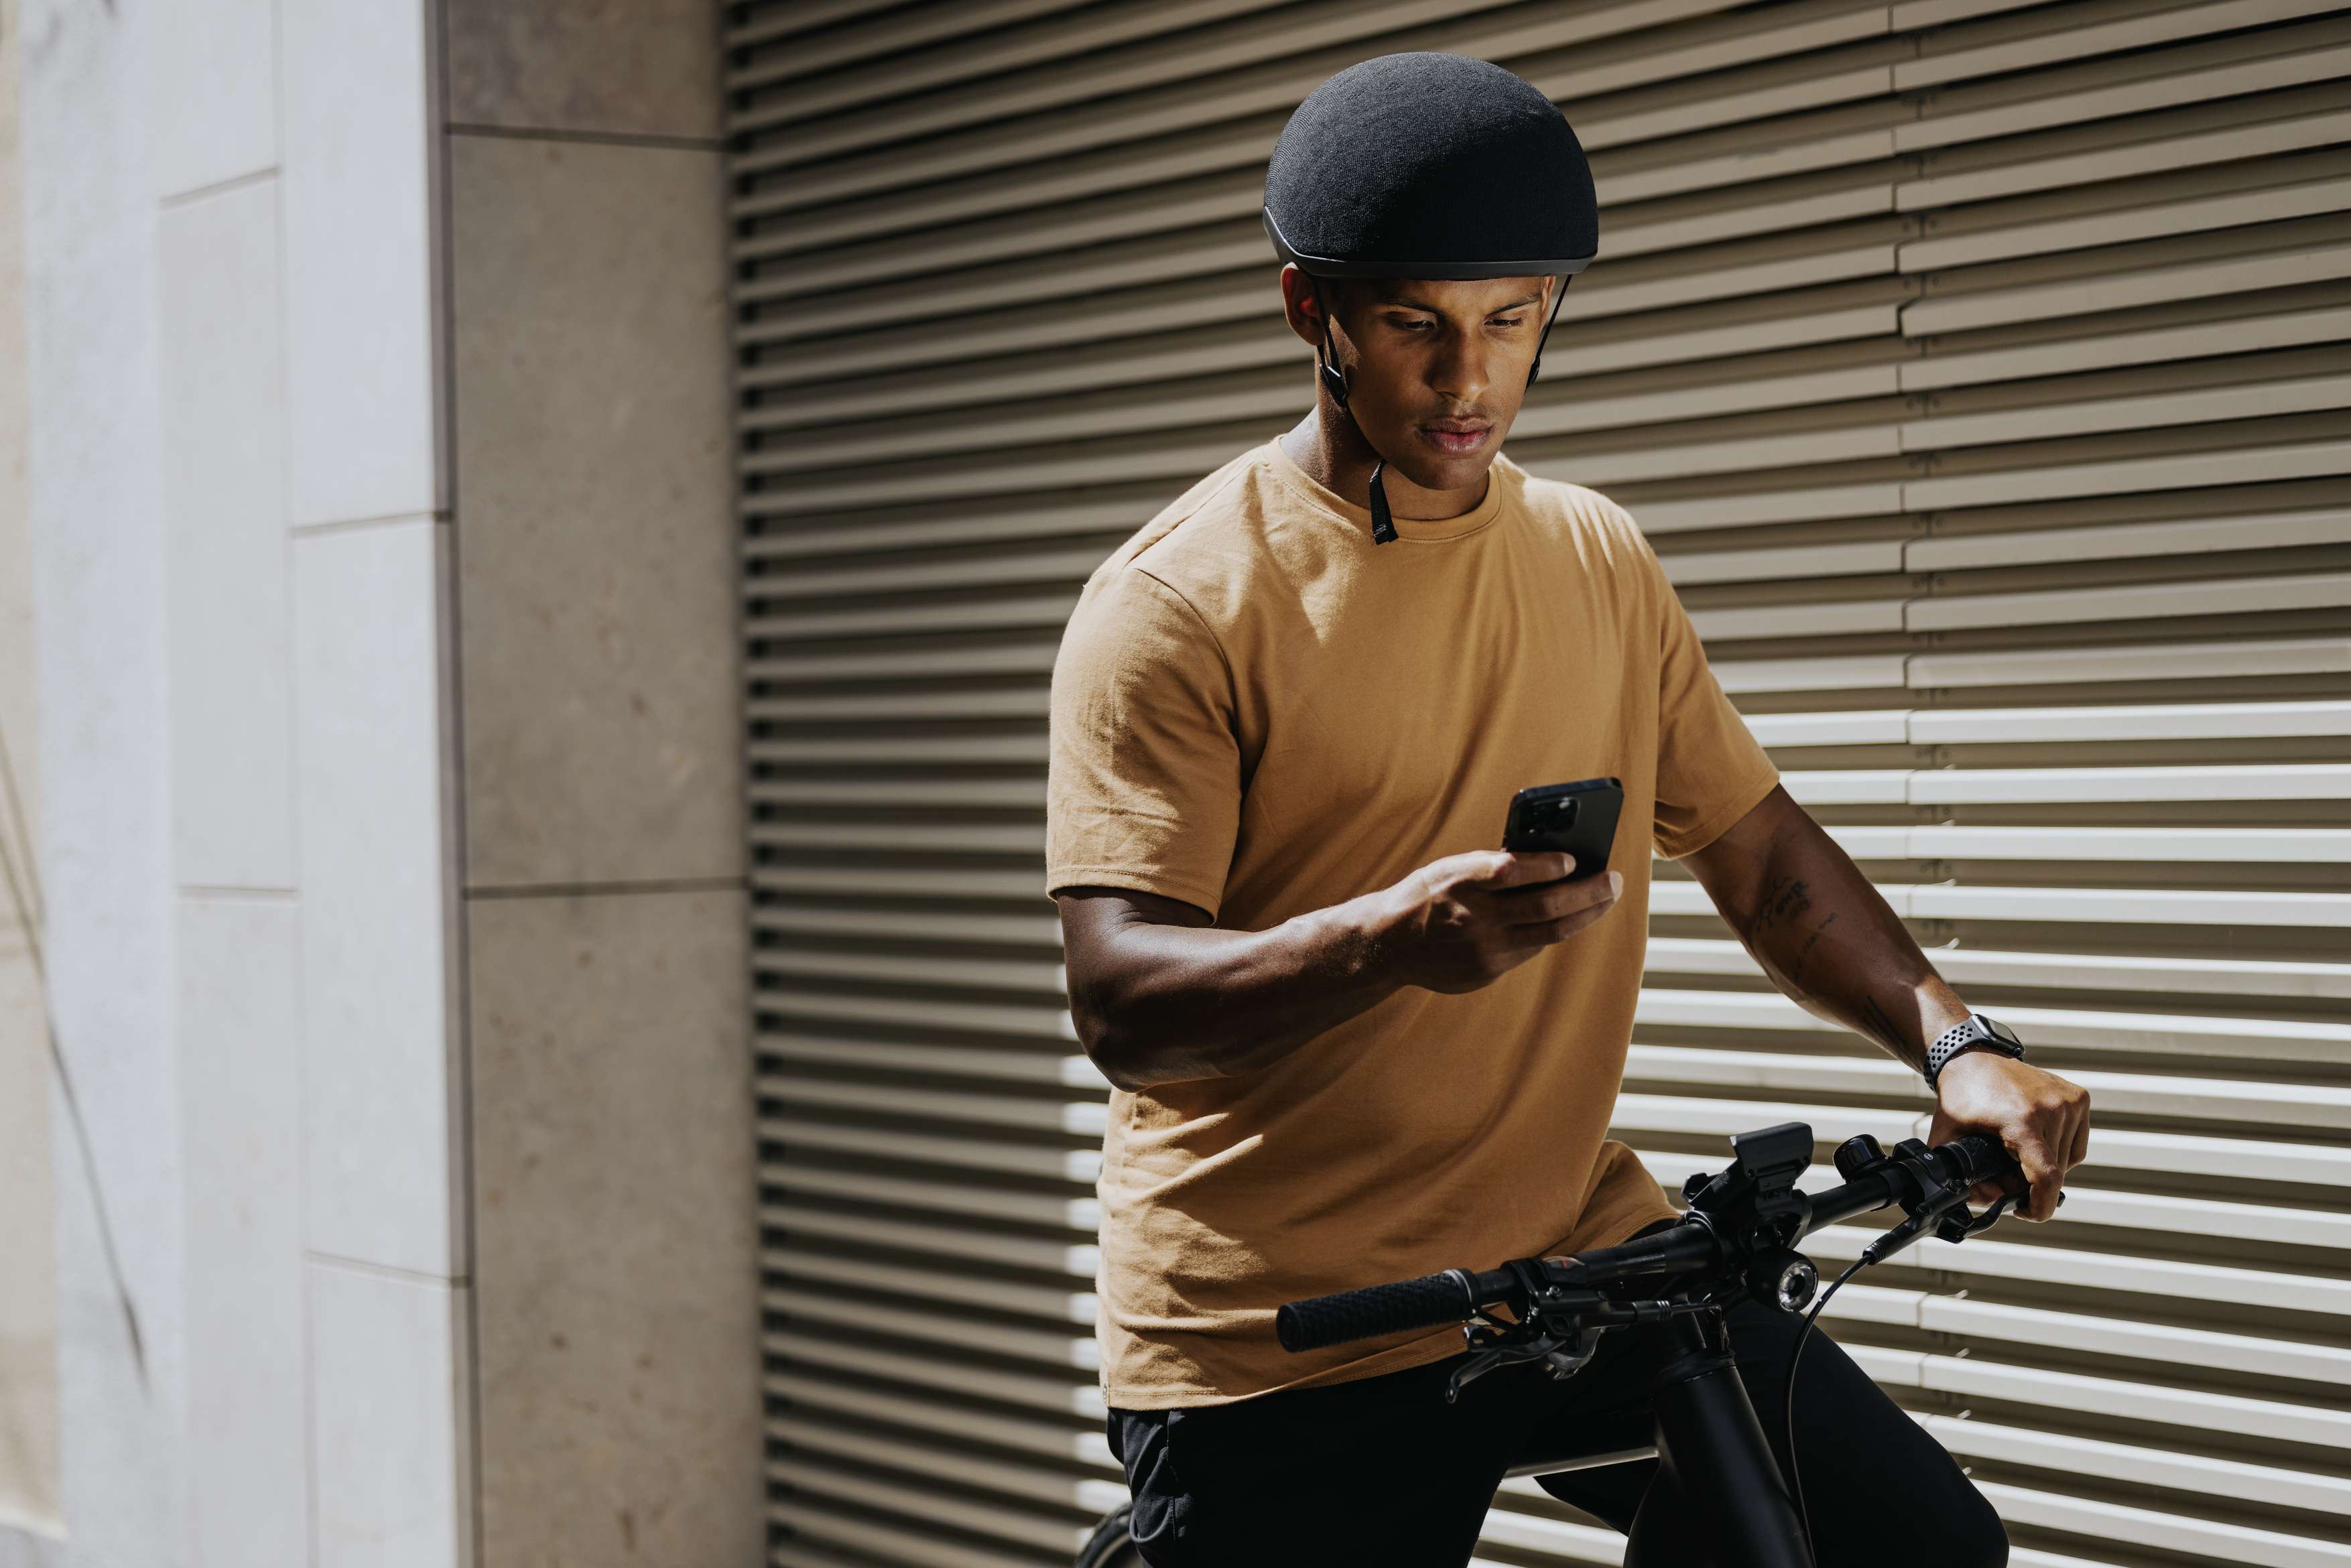 Bosch eBike Systems expands theft protection and refines eBike navigation